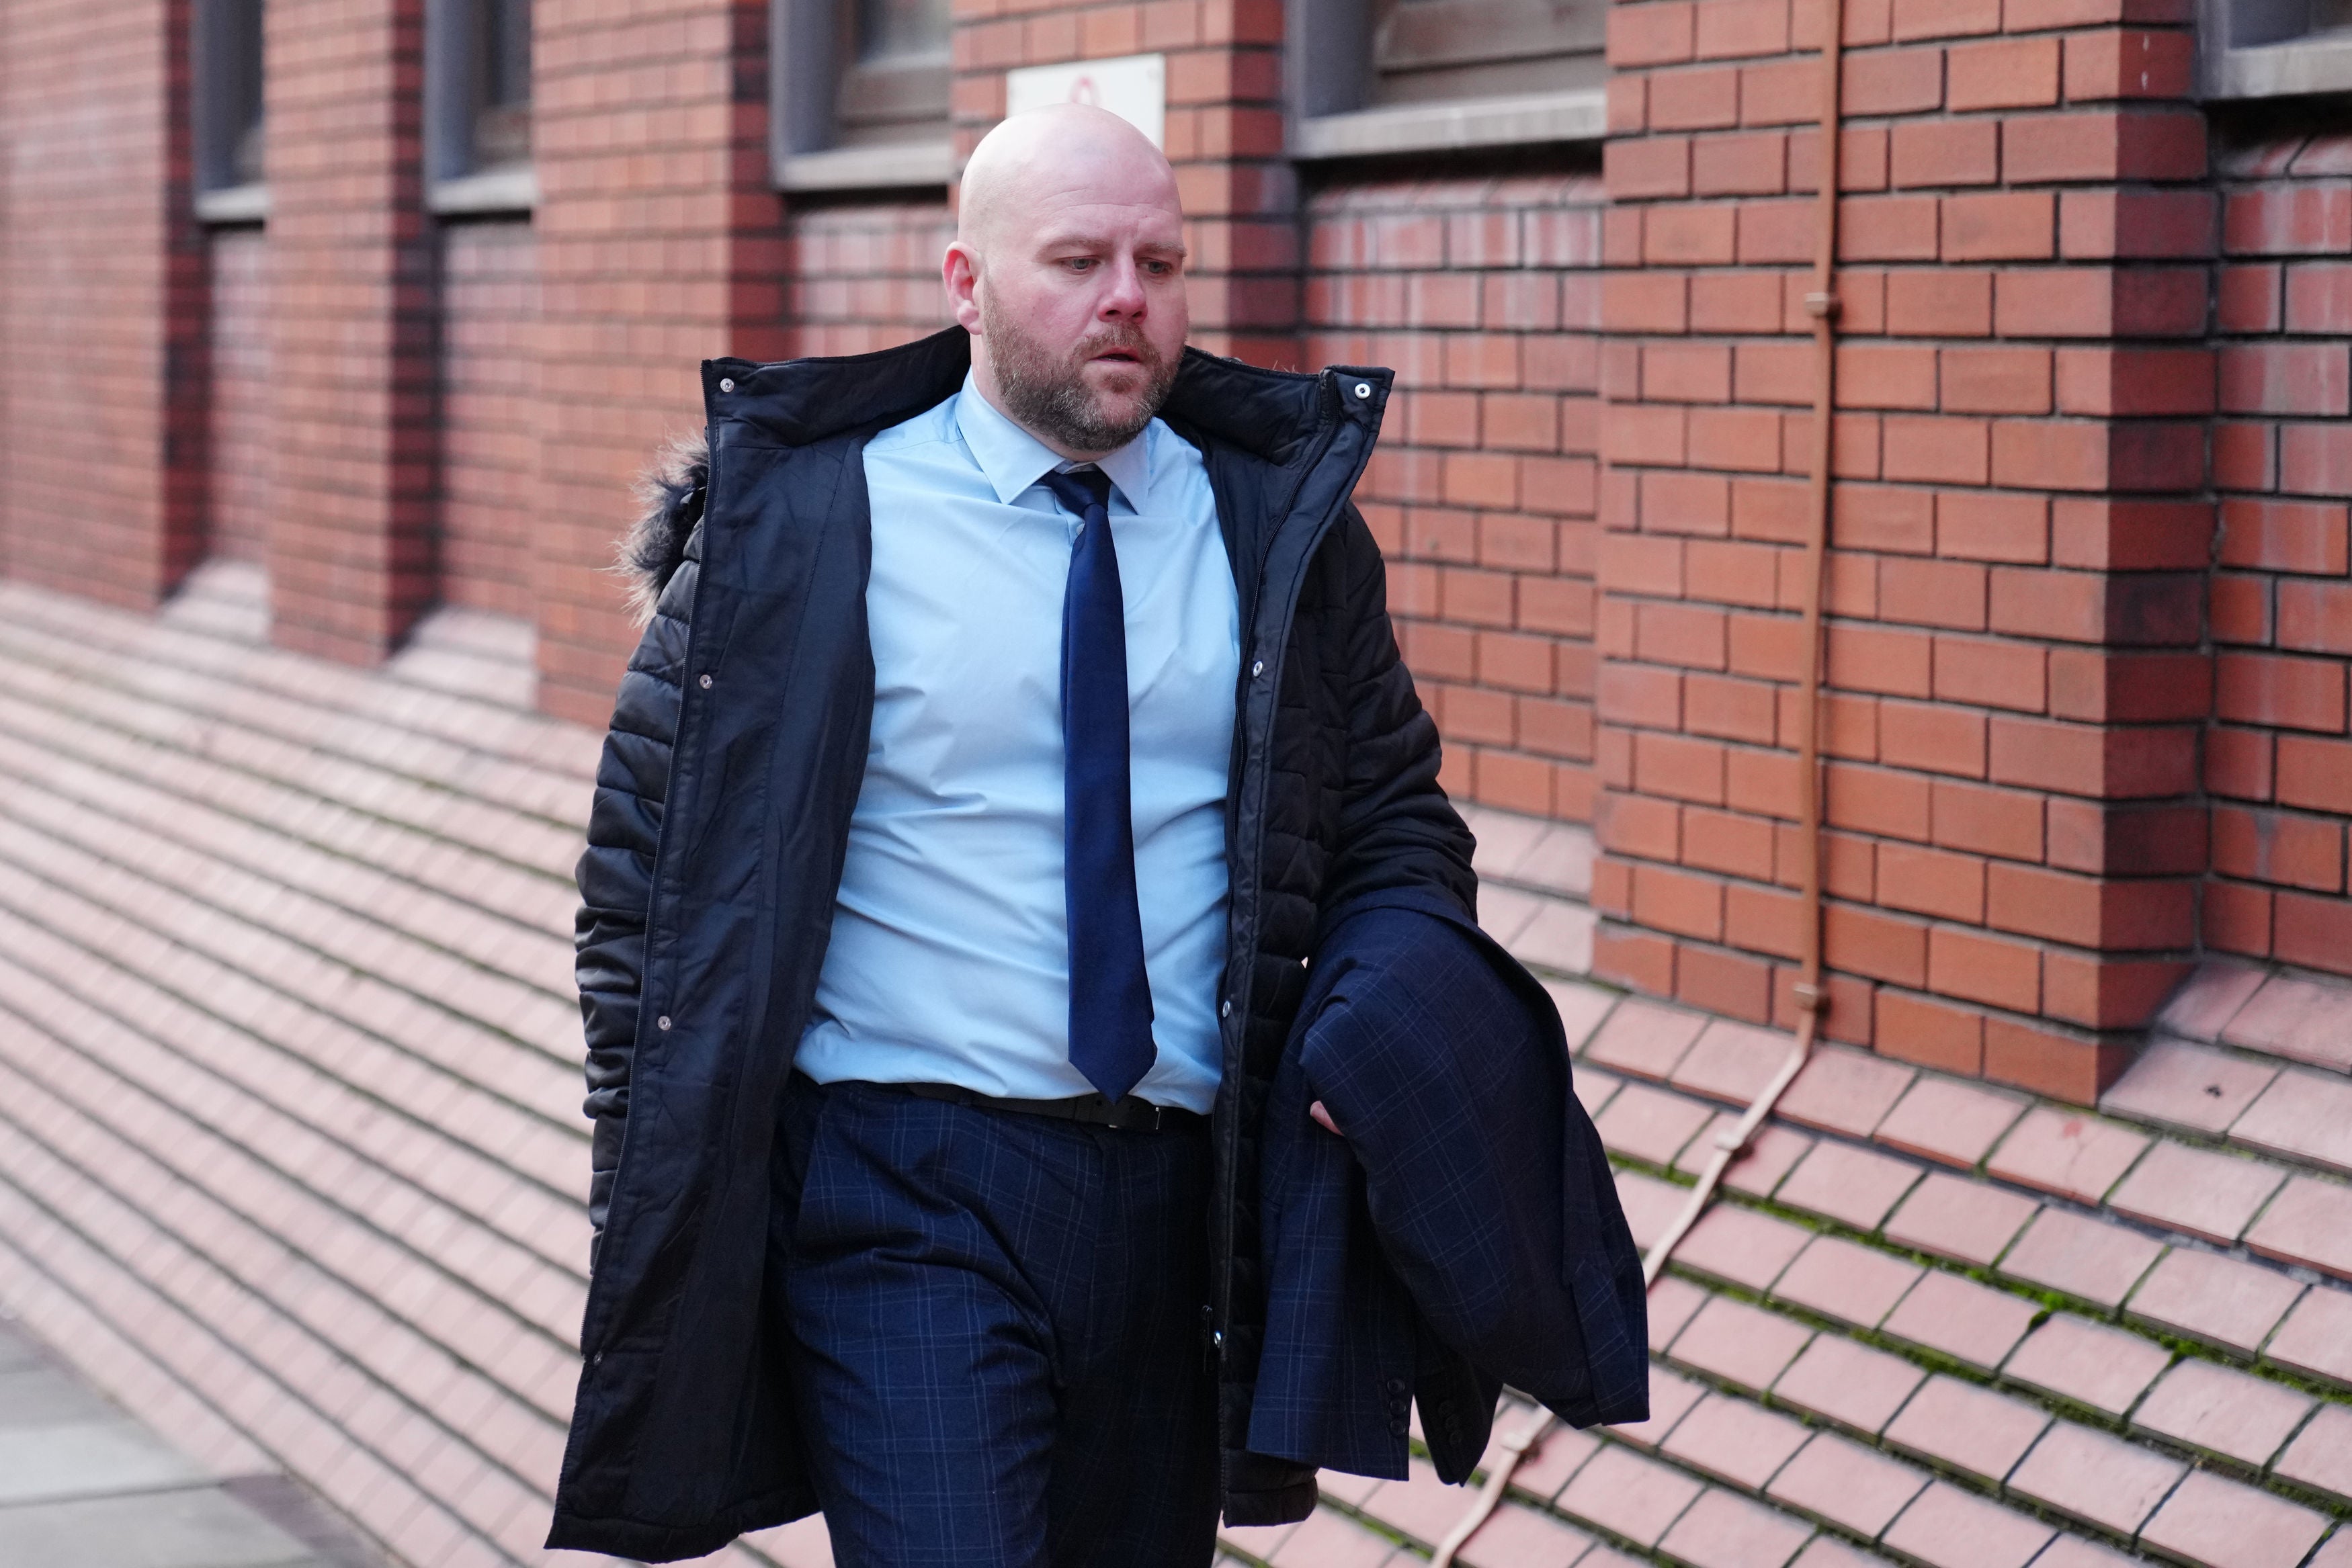 Co-defendant John Woodliff was found not guilty of one offence of fraud